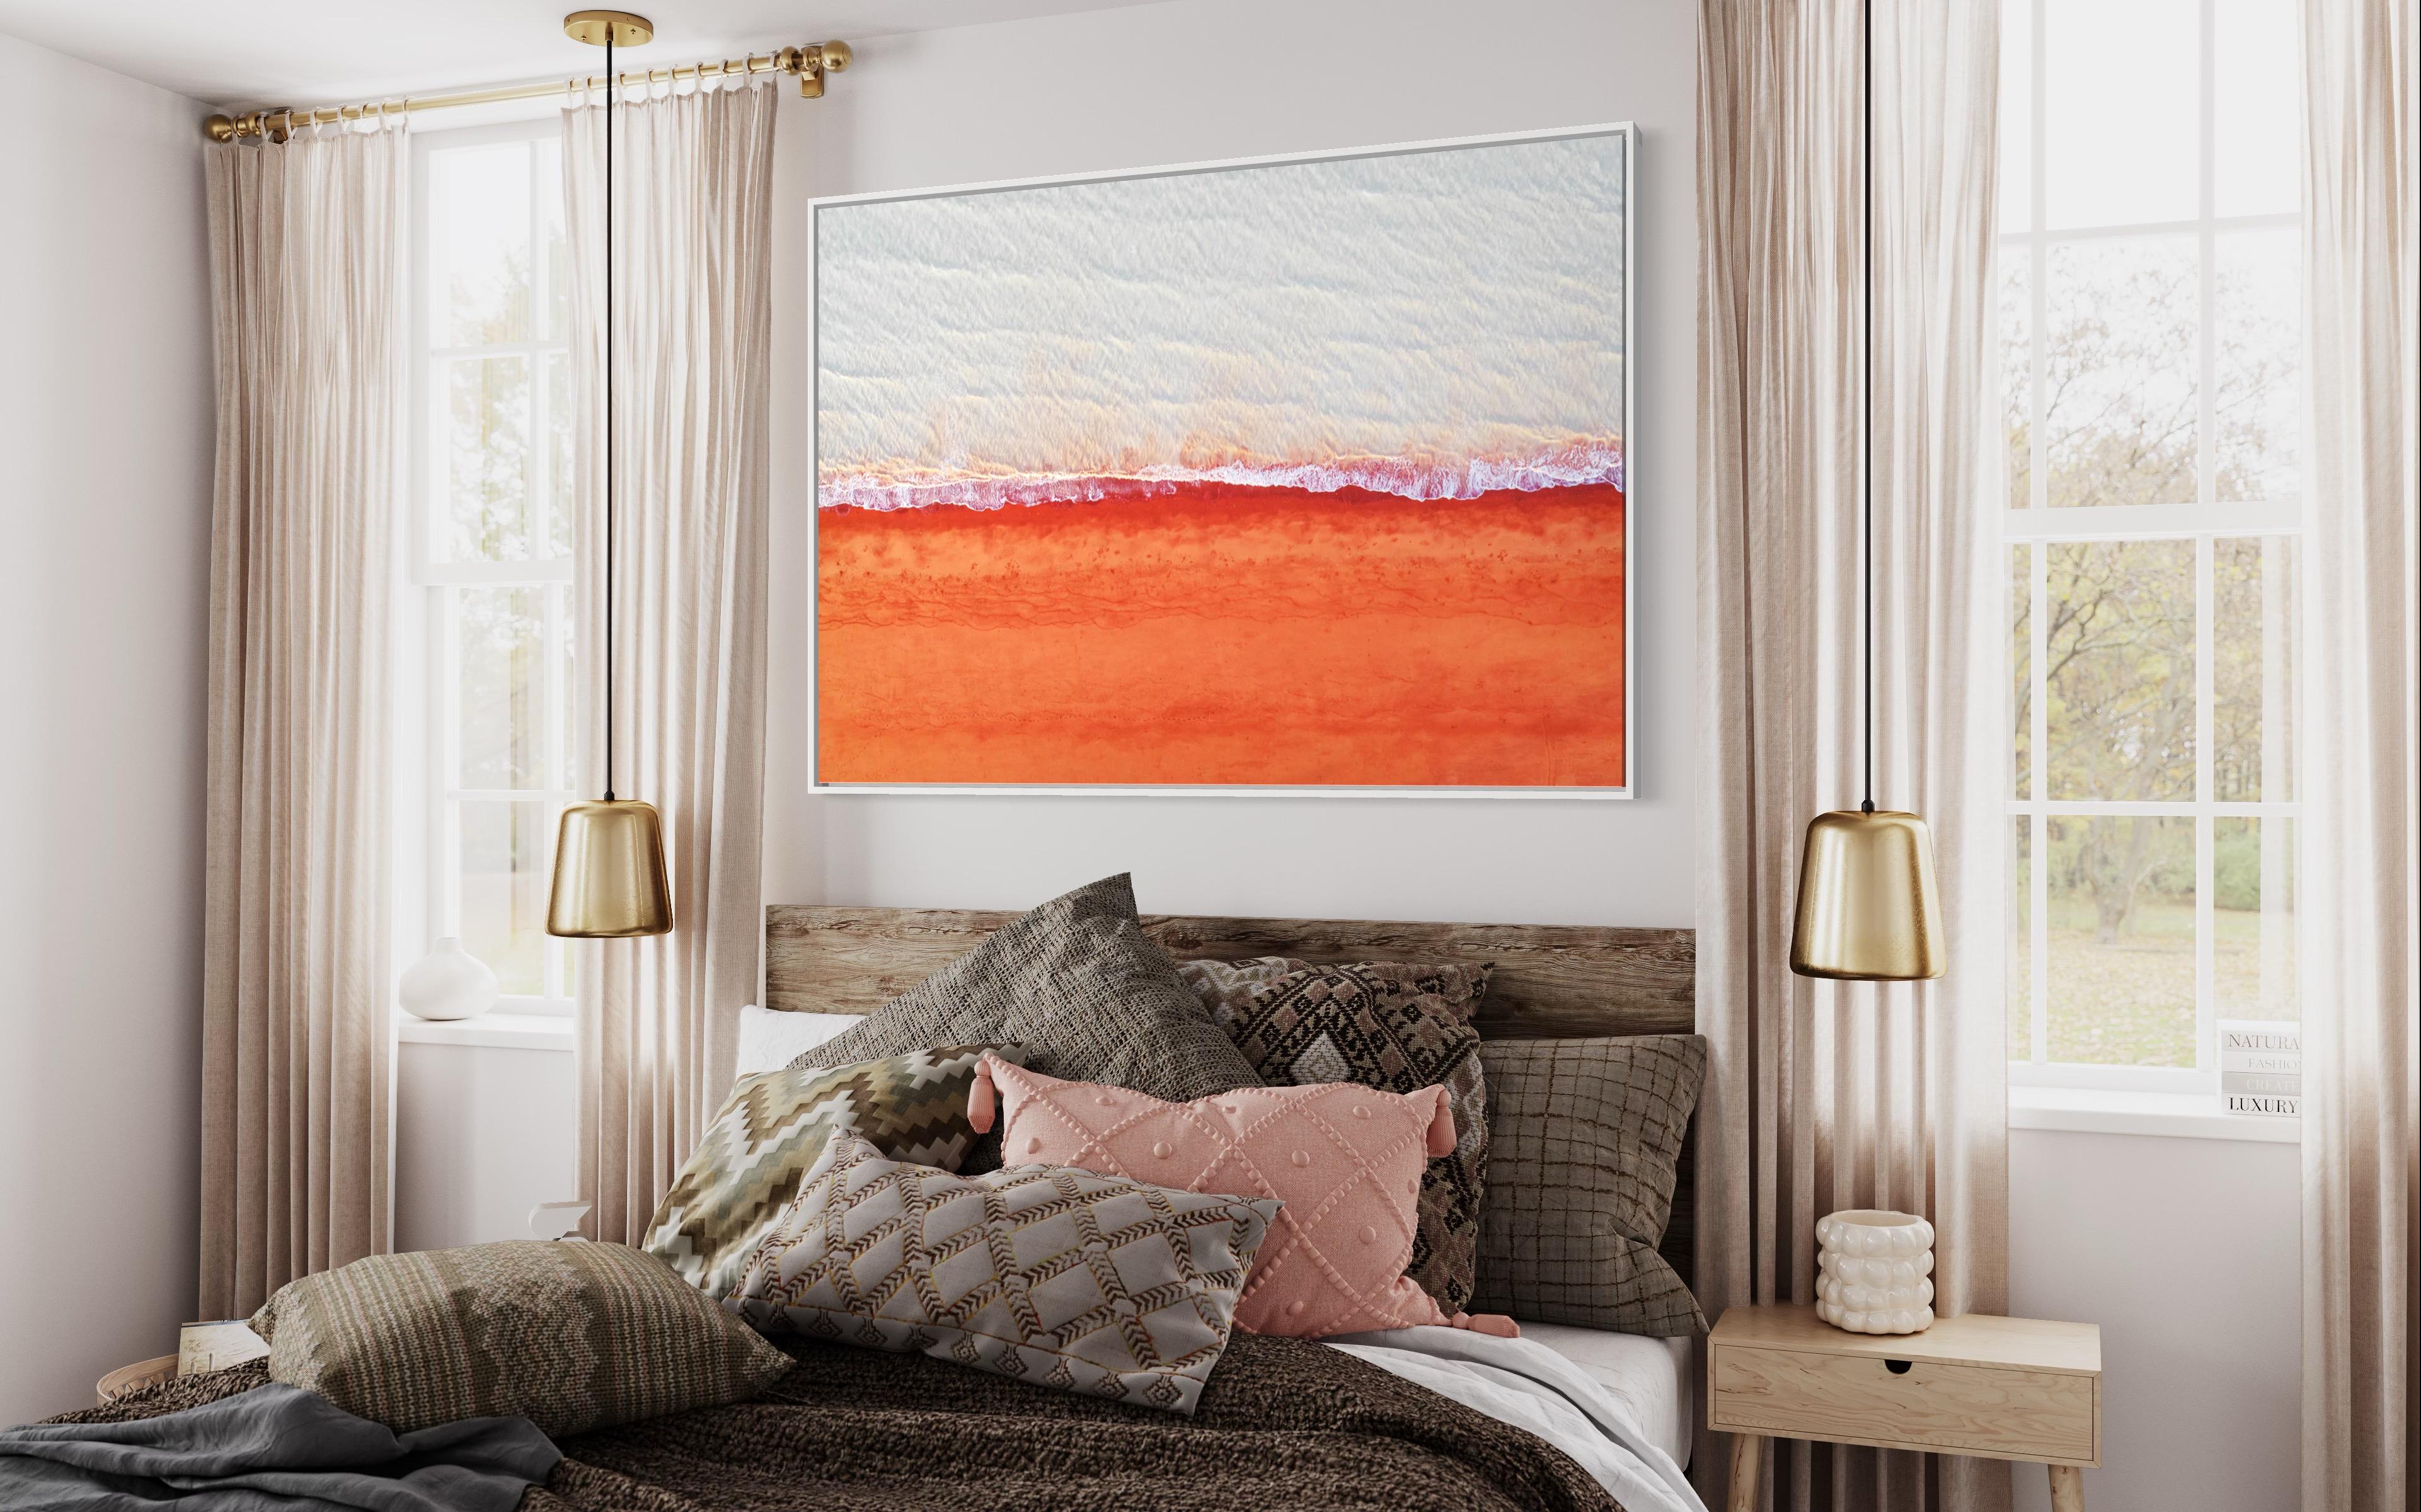 Limited Edition print of 5 . Mounted on diasec ( acrylic face)
About the picture : Pindan Beach known as 'red soil' country locally is located in the Kimberley region near
Broome, Western Australia. The naturally occurring orange and red colour